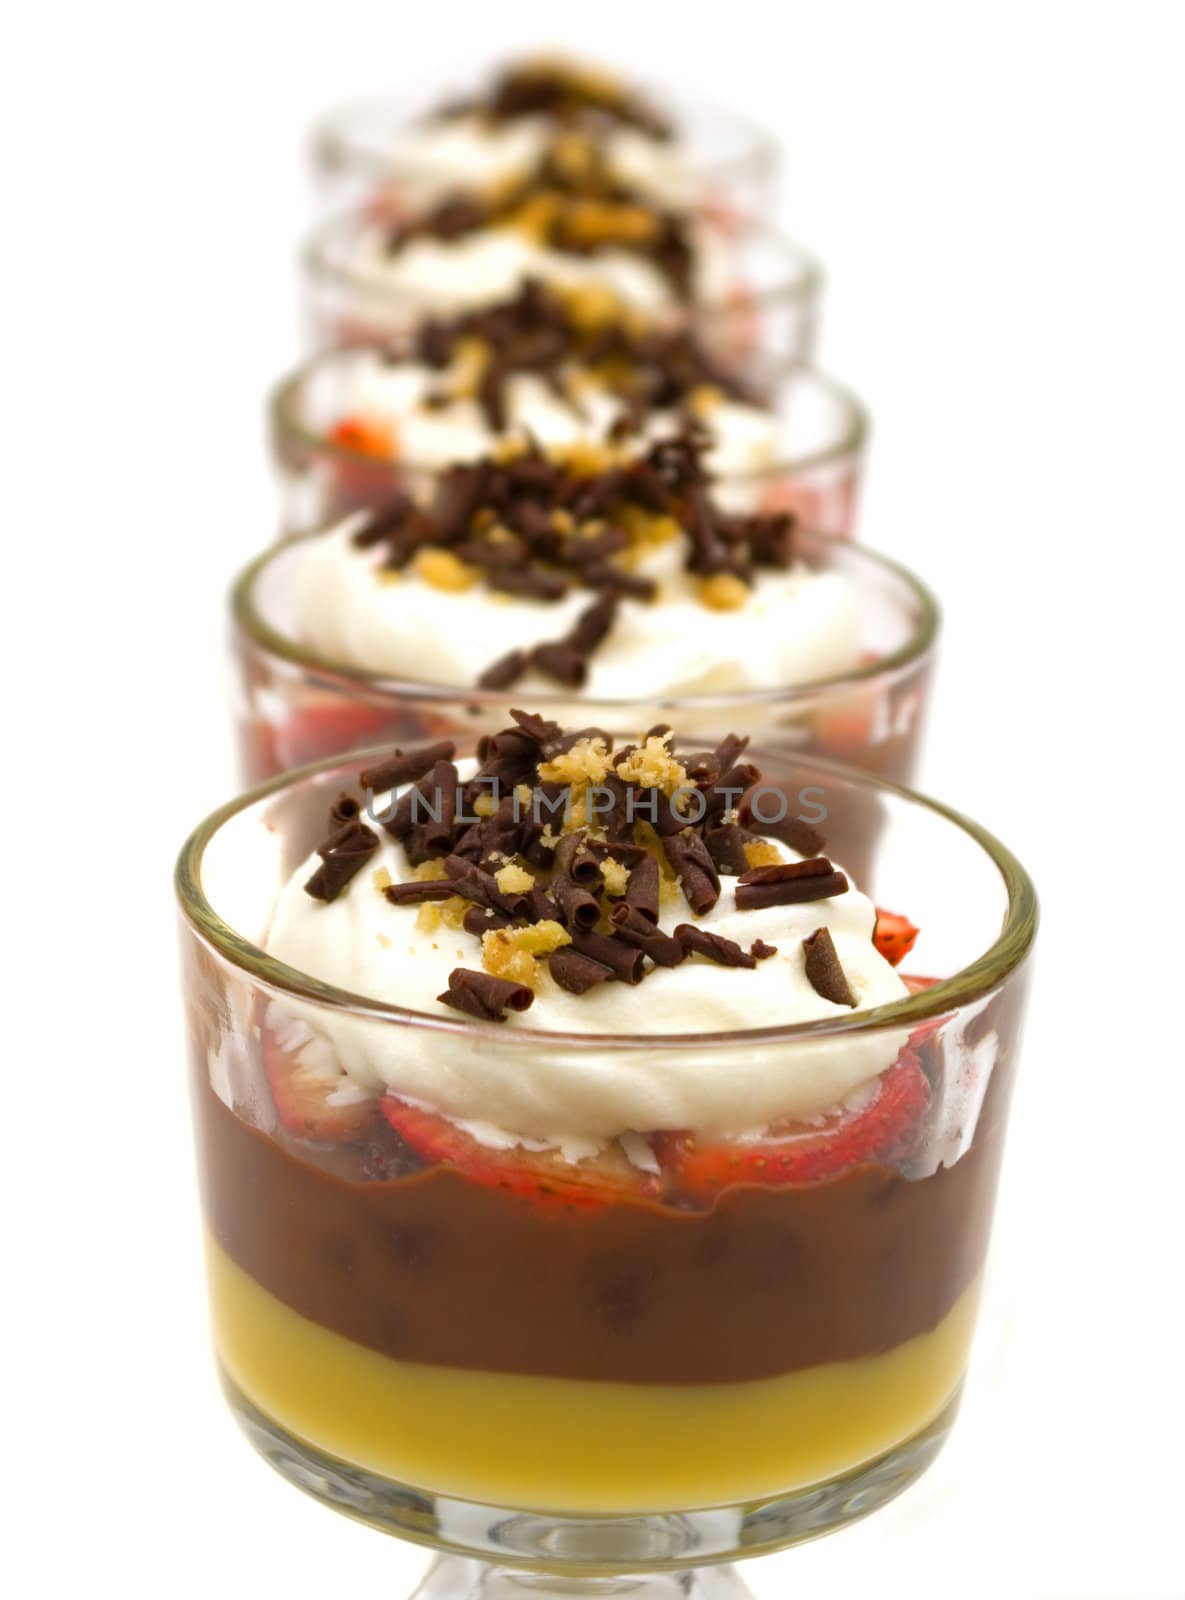 Trifle with chocolate pudding, vanilla pudding, strawberries, chocolate cake pieces, whip cream, walnuts and chocolate curls